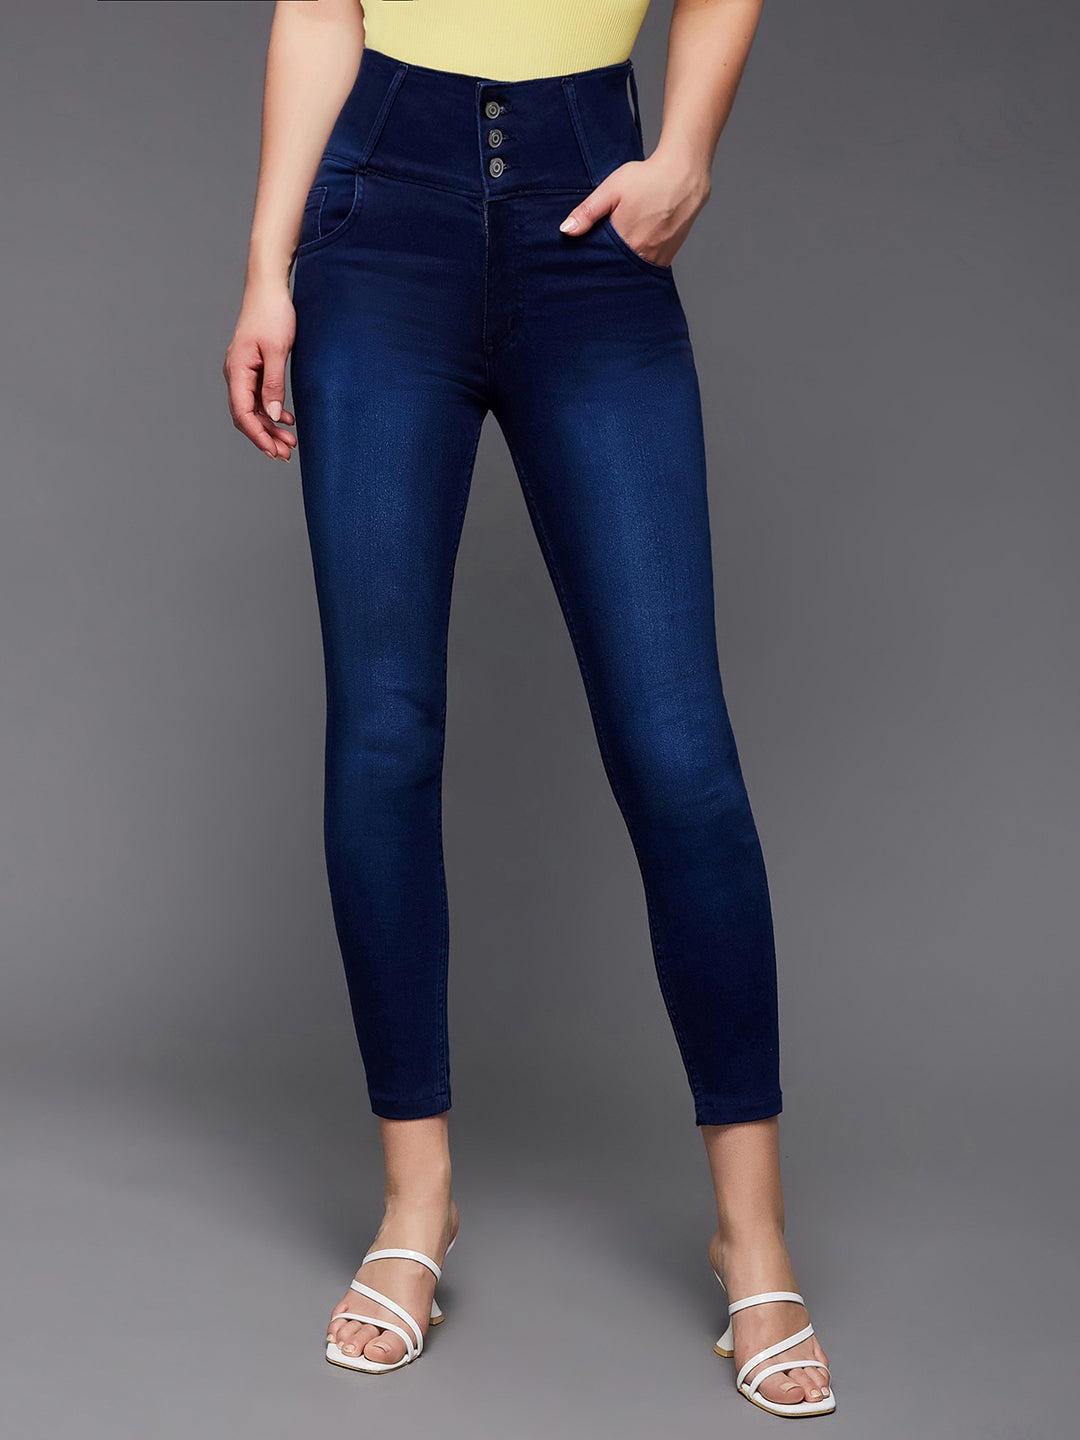 Navy Blue Skinny Fit High Rise Clean Look Cropped Length Stretchable High Waist Denim Jeans